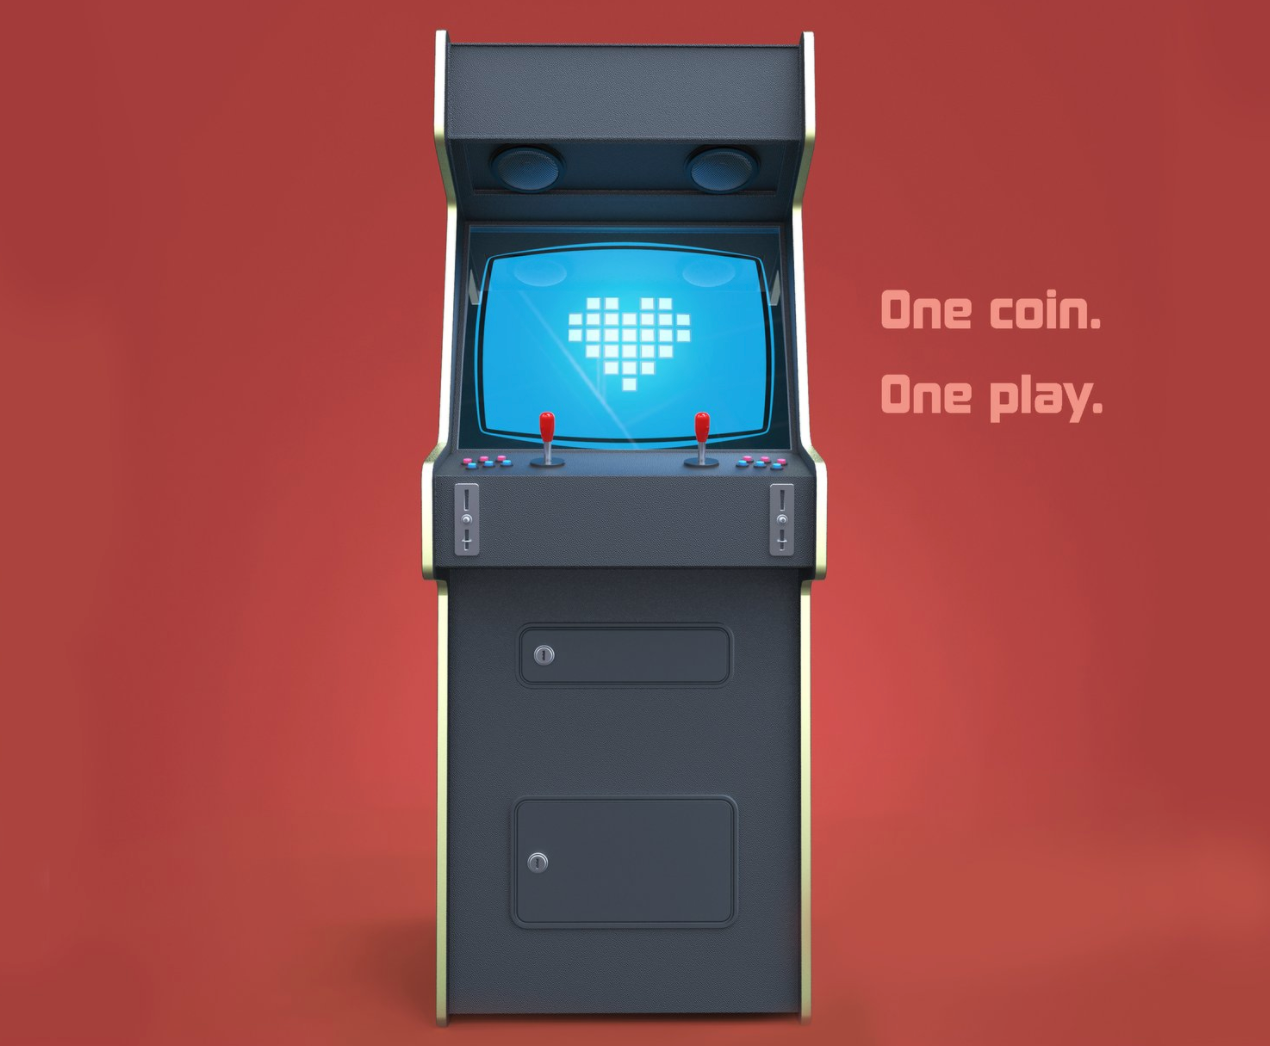 Fake Arcade Coin Door Laser Cutter Project by